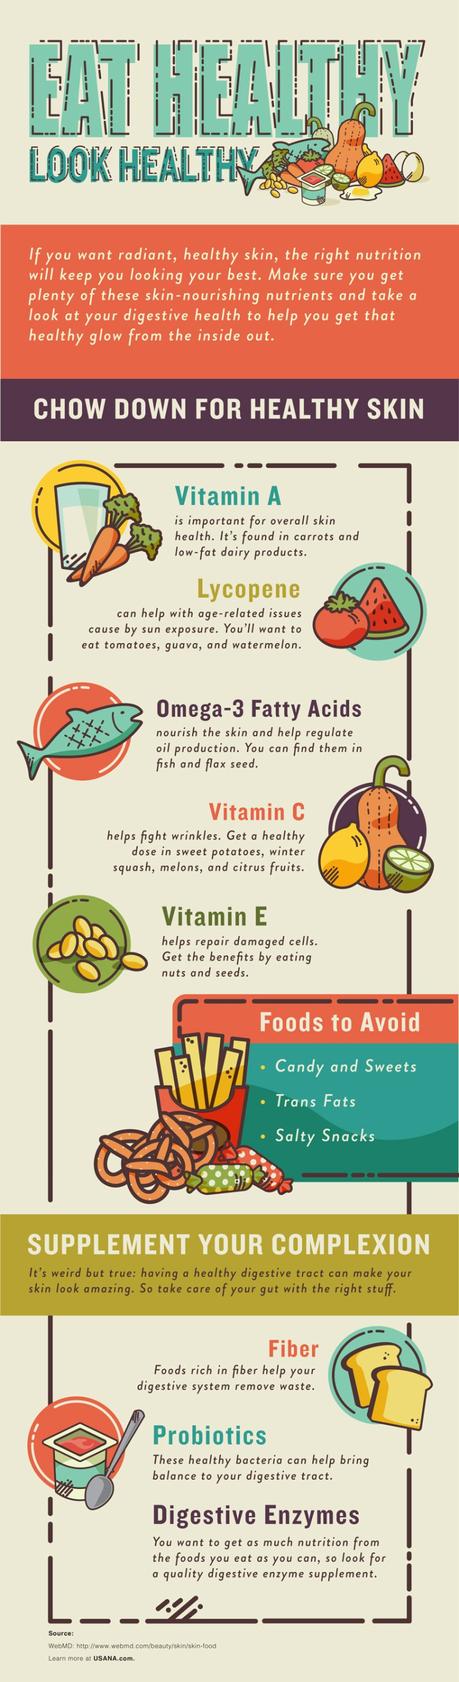 Top Nutrients to Keep Your Skin Healthy [INFOGRAPHIC]